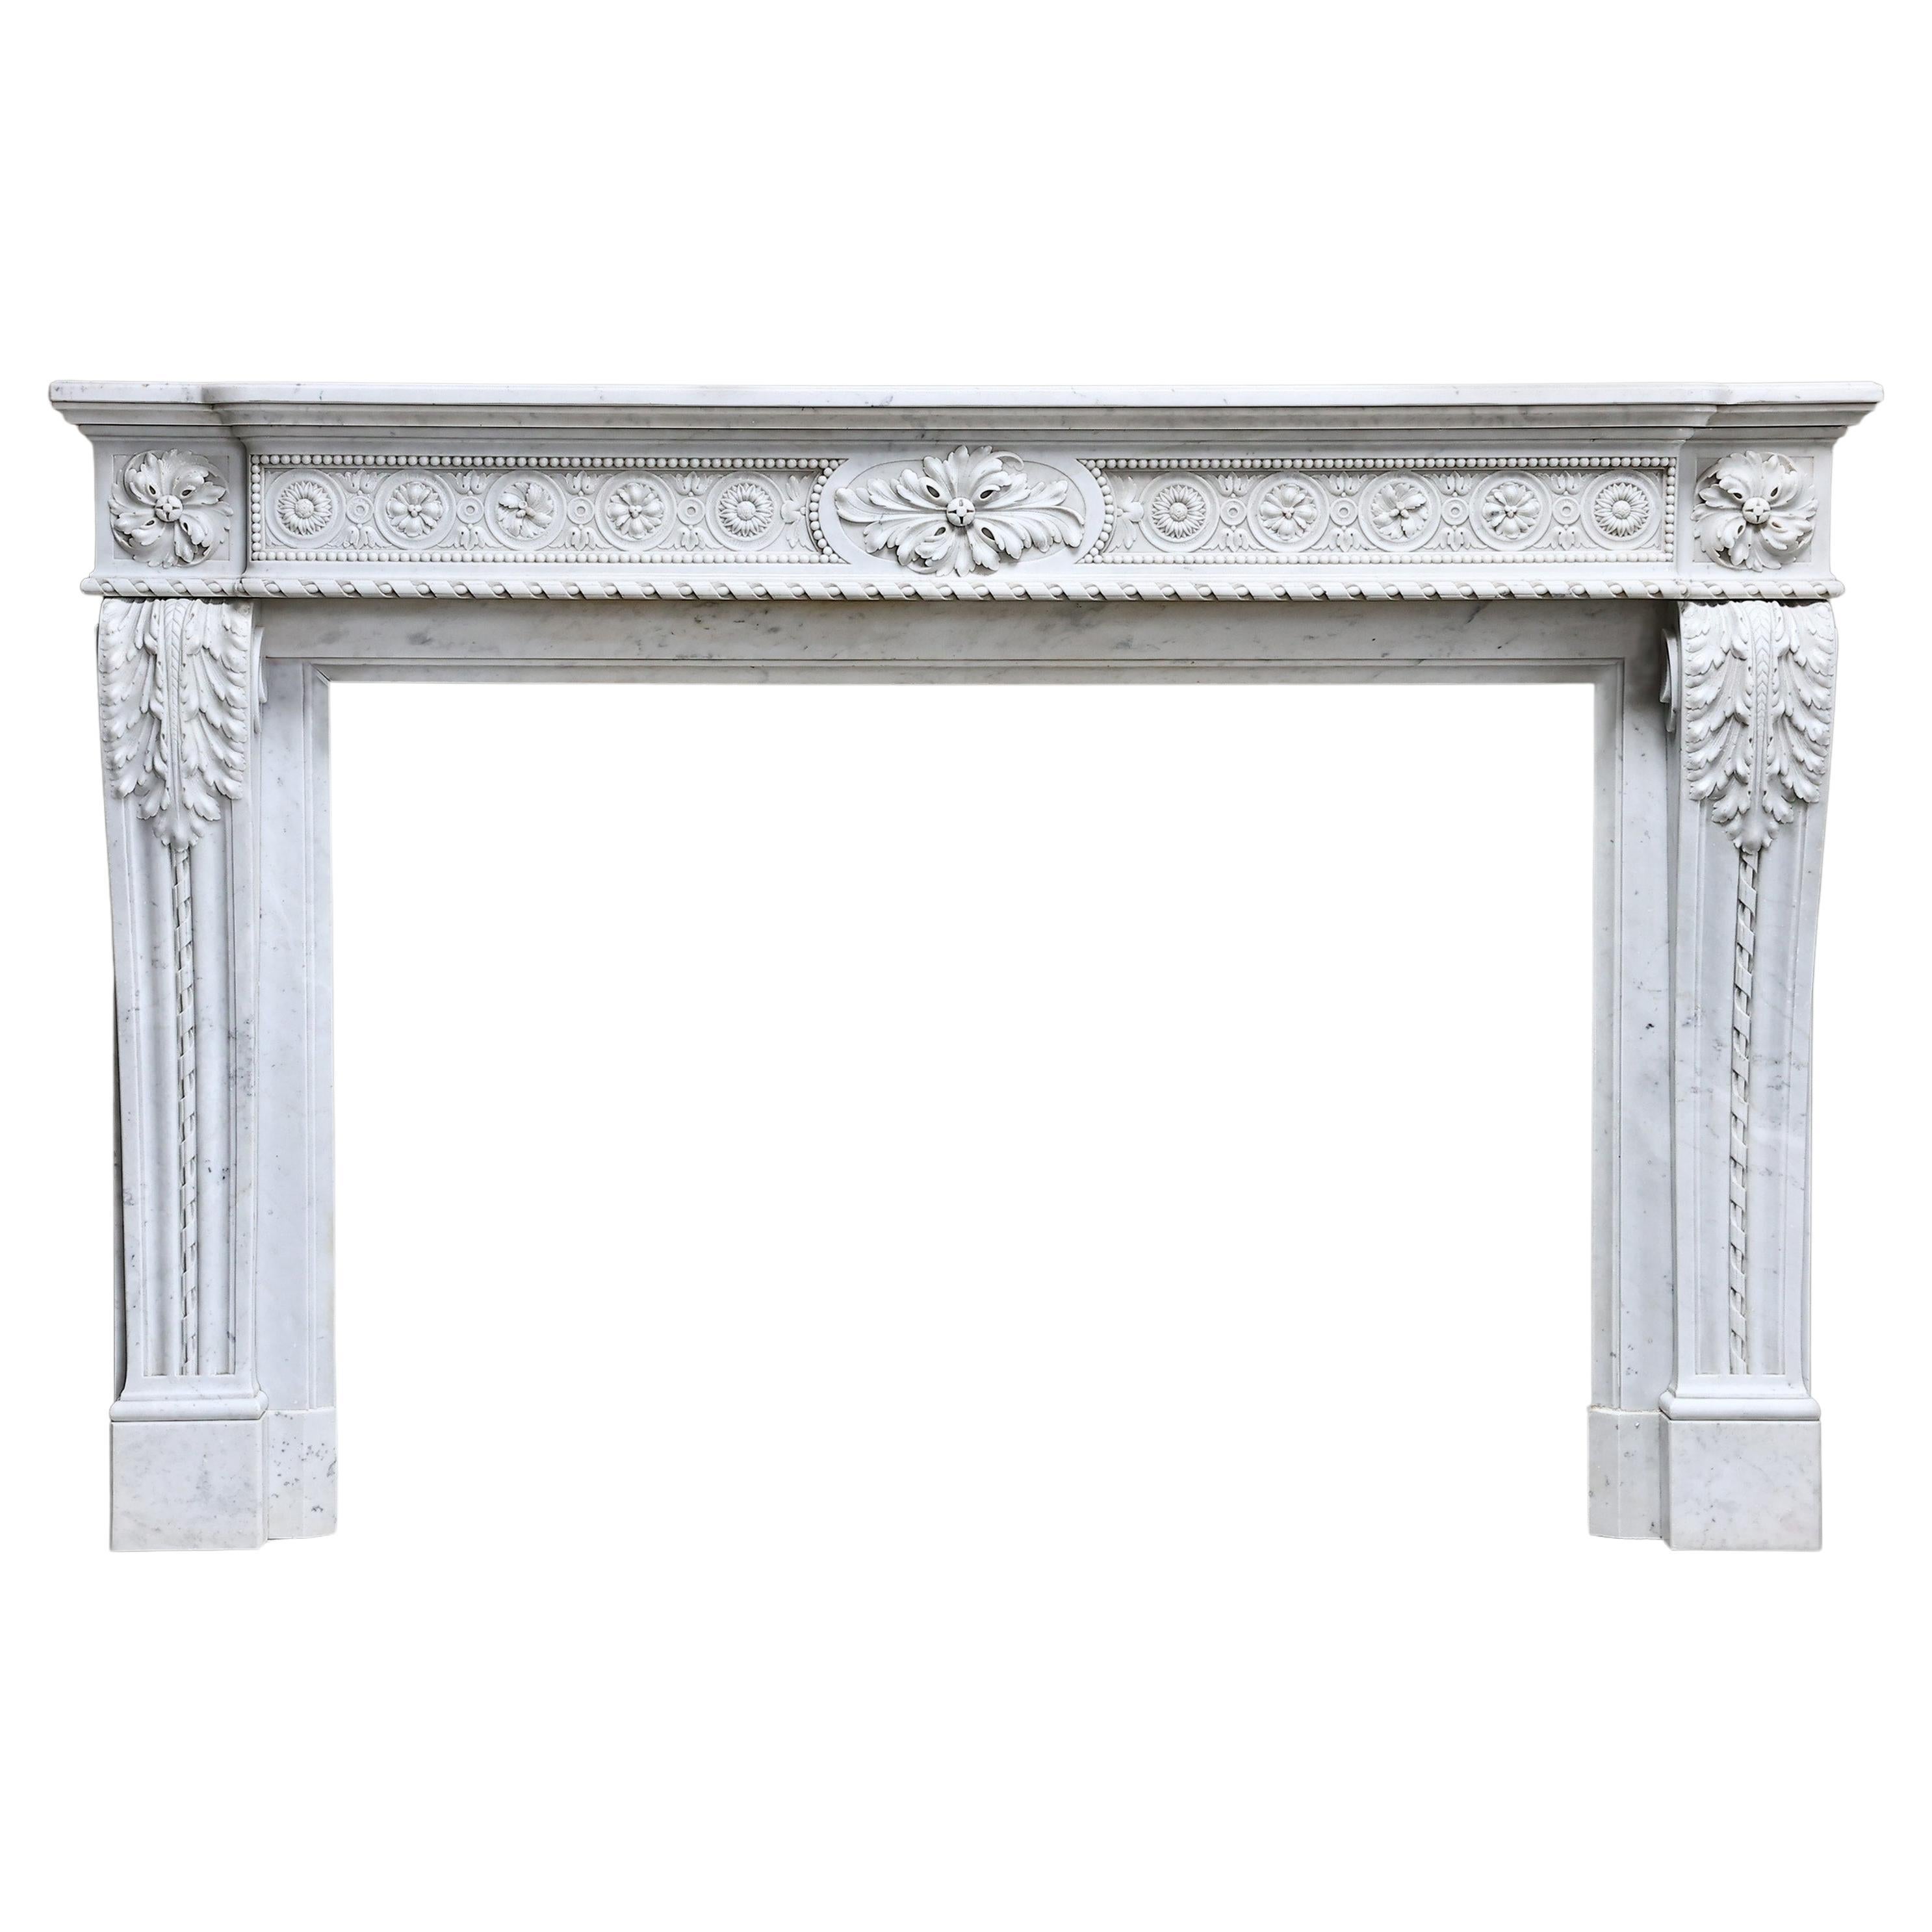 Antique Marble Fireplace Surround  Carrara Marble  Louis XVI  19th Century For Sale